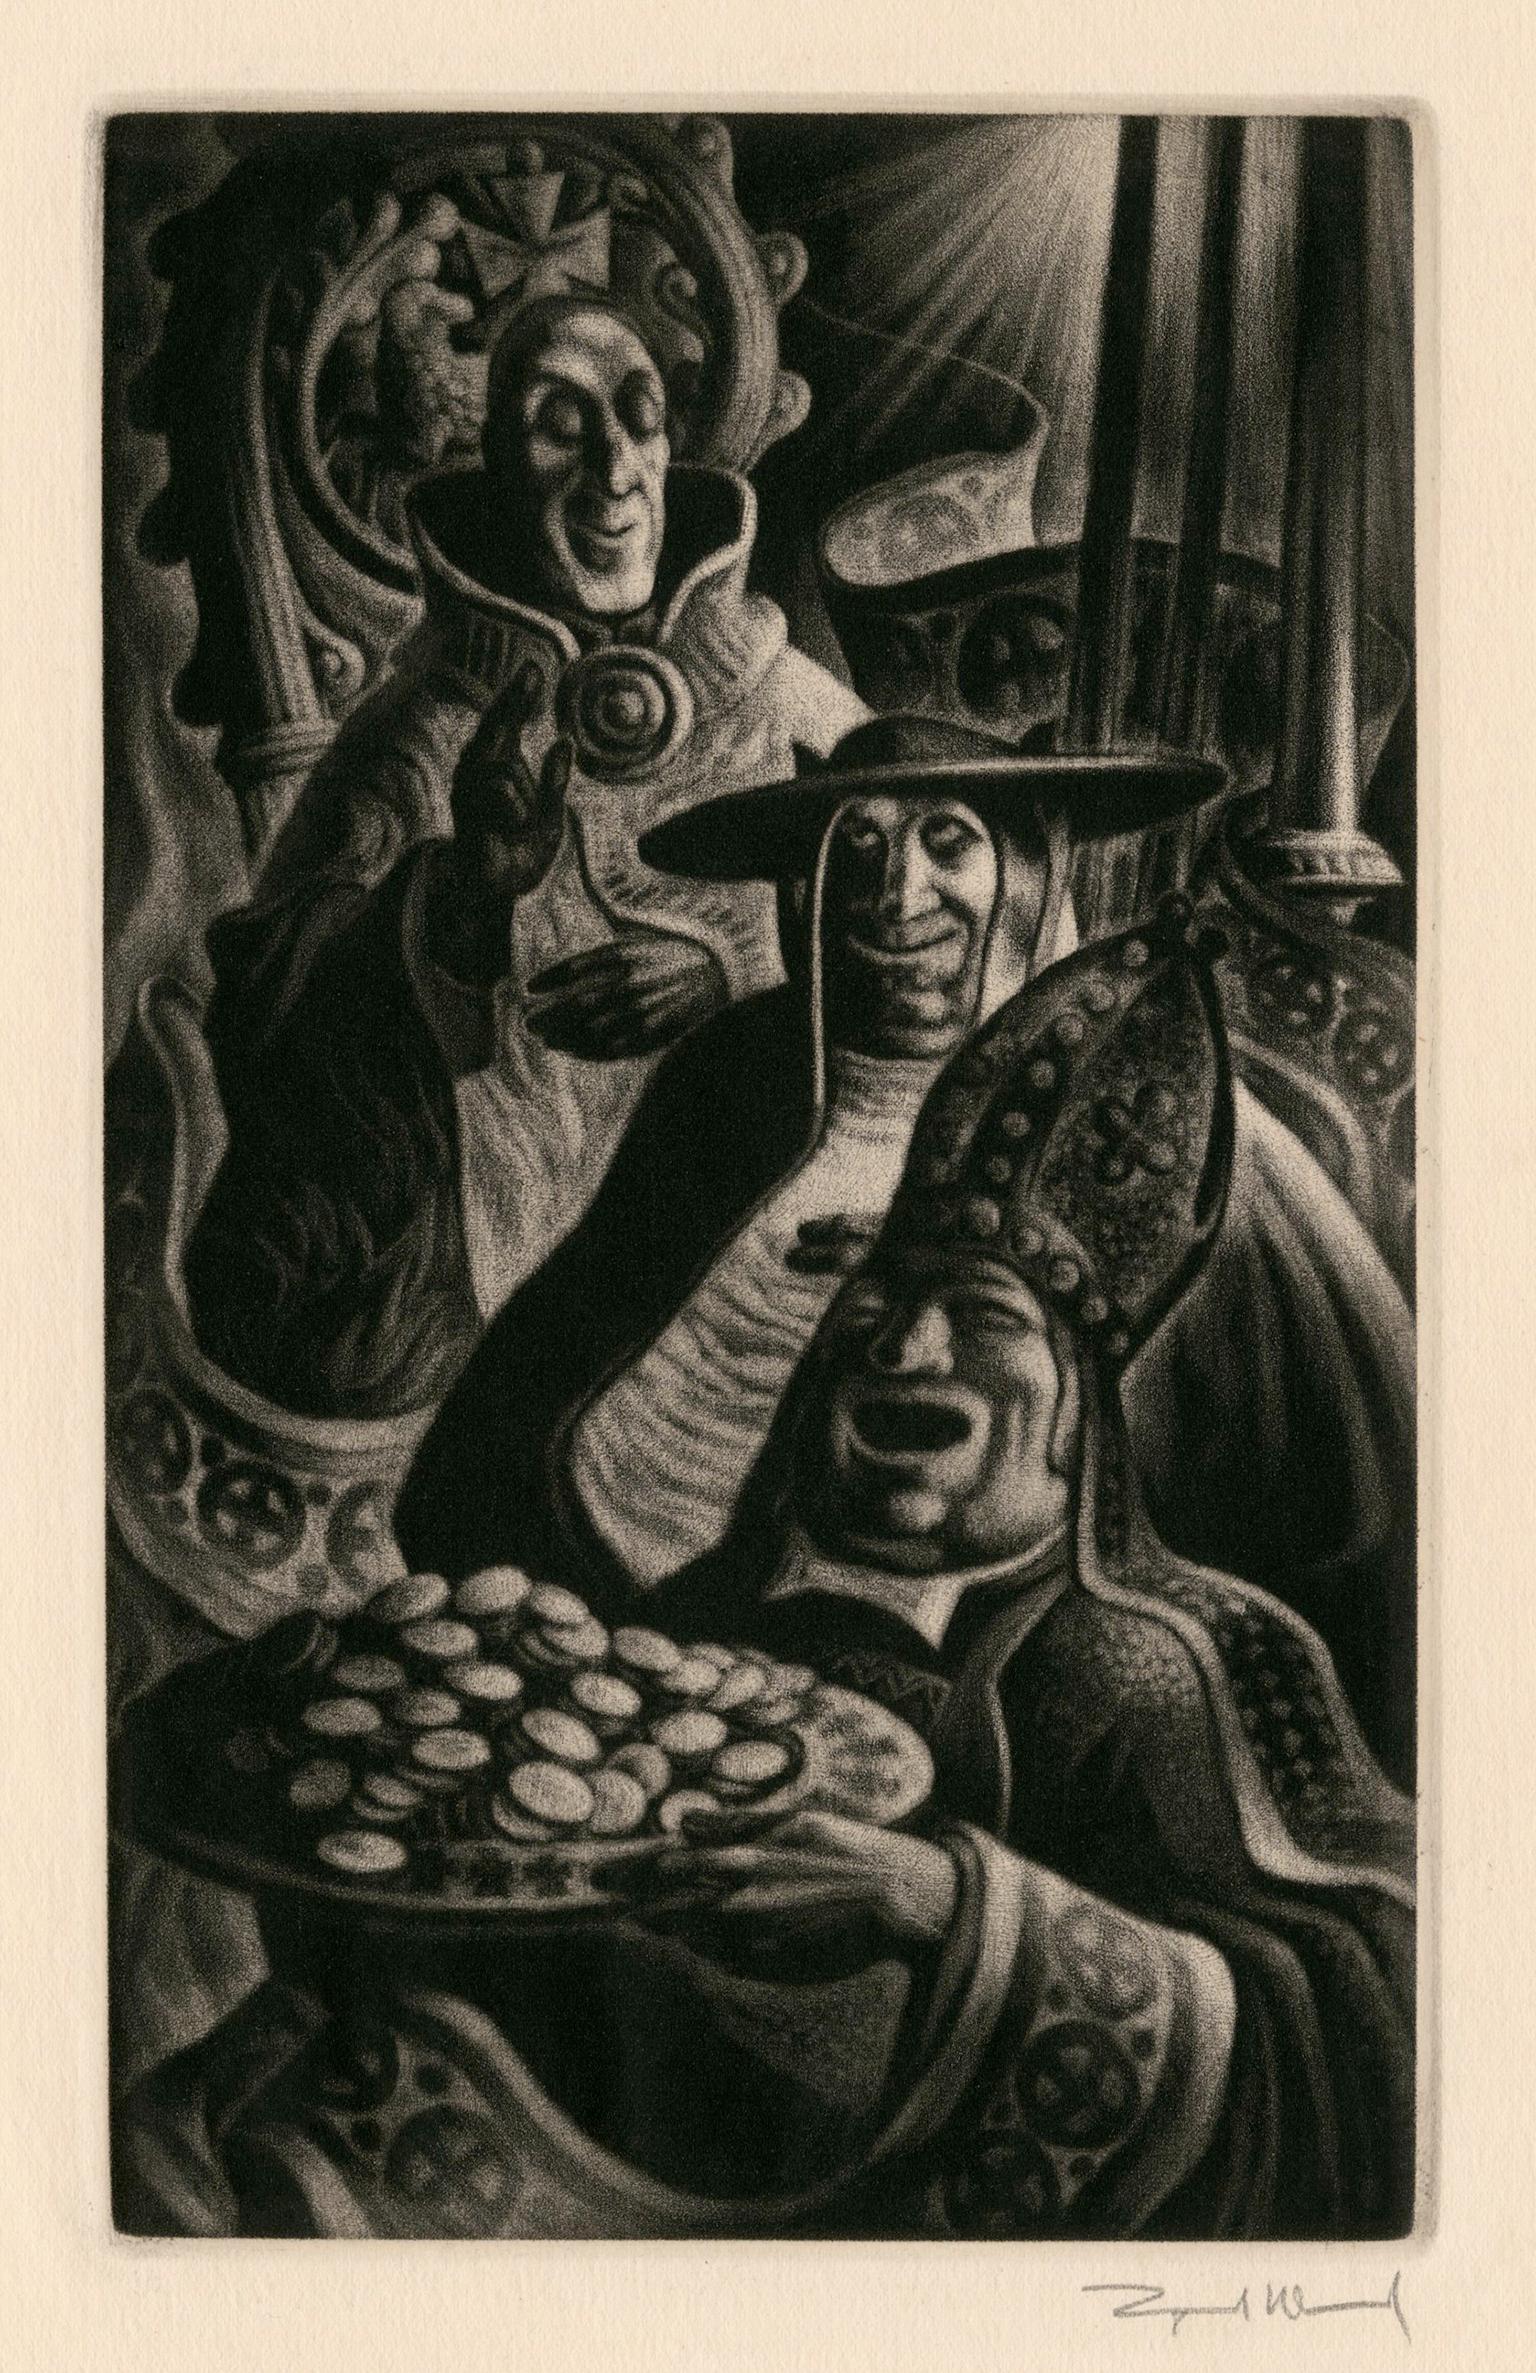 Lynd Ward Figurative Print - 'Pope' from 'In Praise of Folly' — 1940s Graphic Modernism